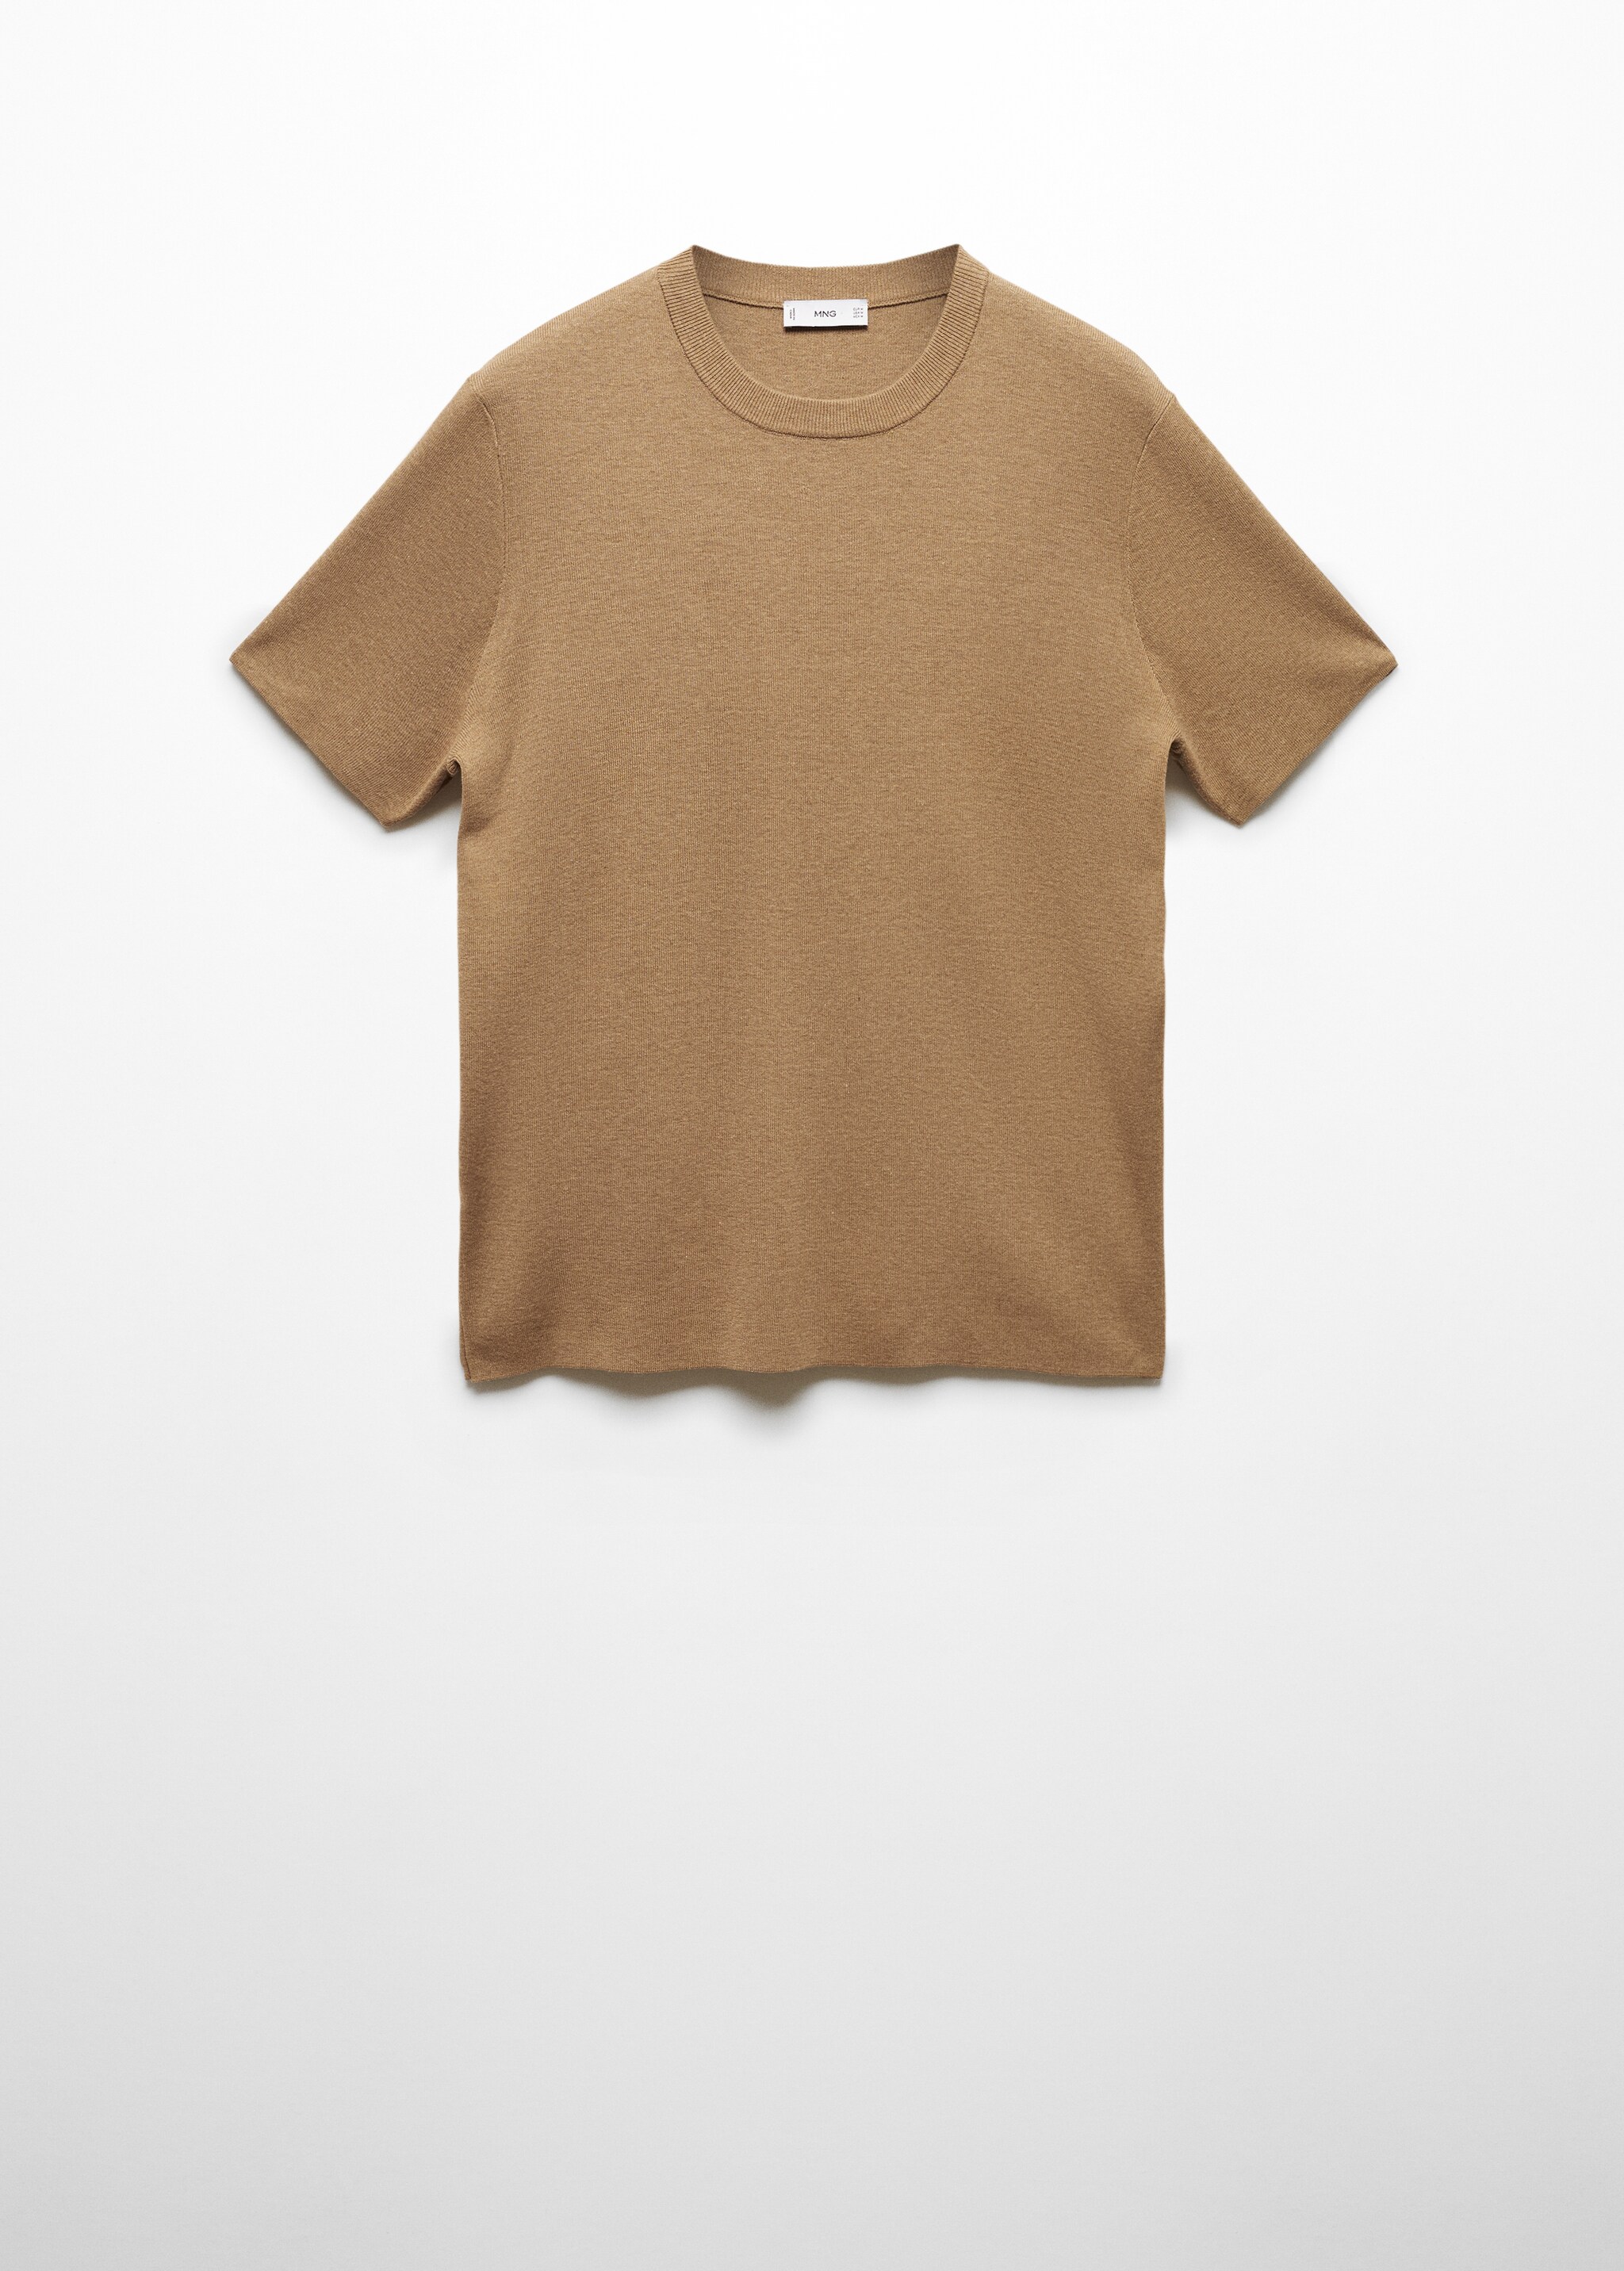 Basic cotton blend t-shirt - Article without model